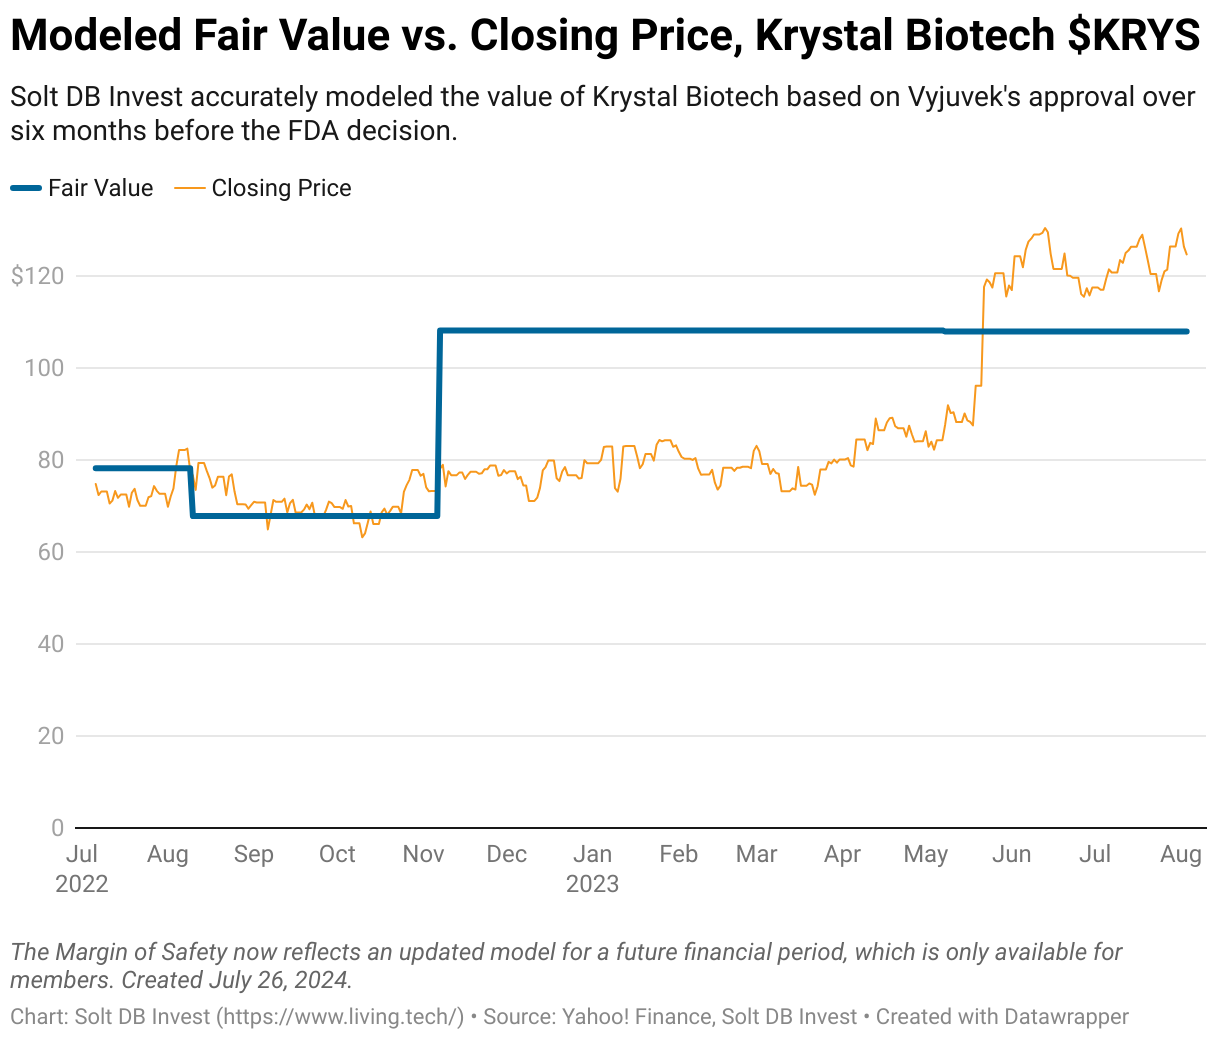 A line chart showing the daily closing price of shares of Krystal Biotech vs. the modeled fair value from Solt DB Invest.